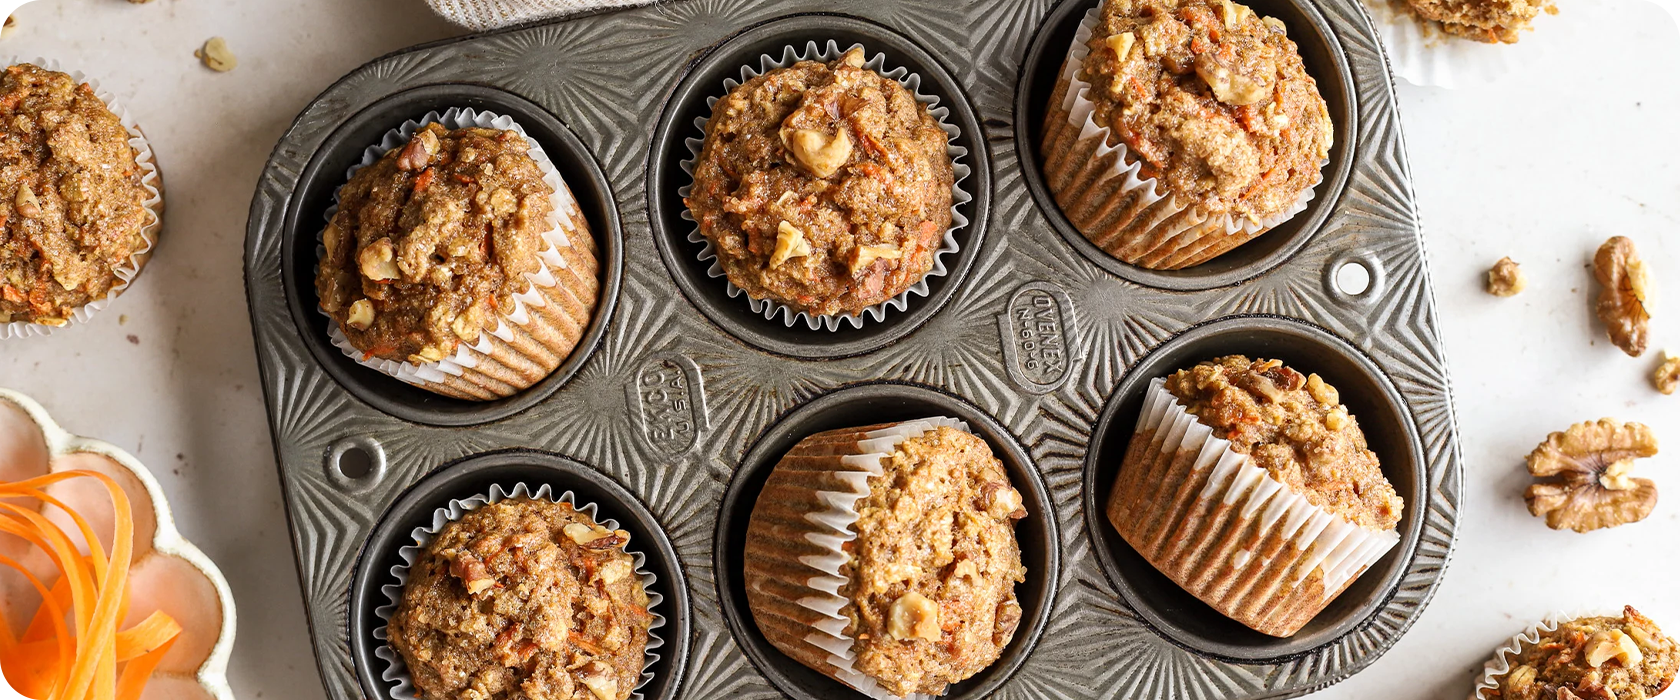 Spring Recipes for Better Hearing Month muffins